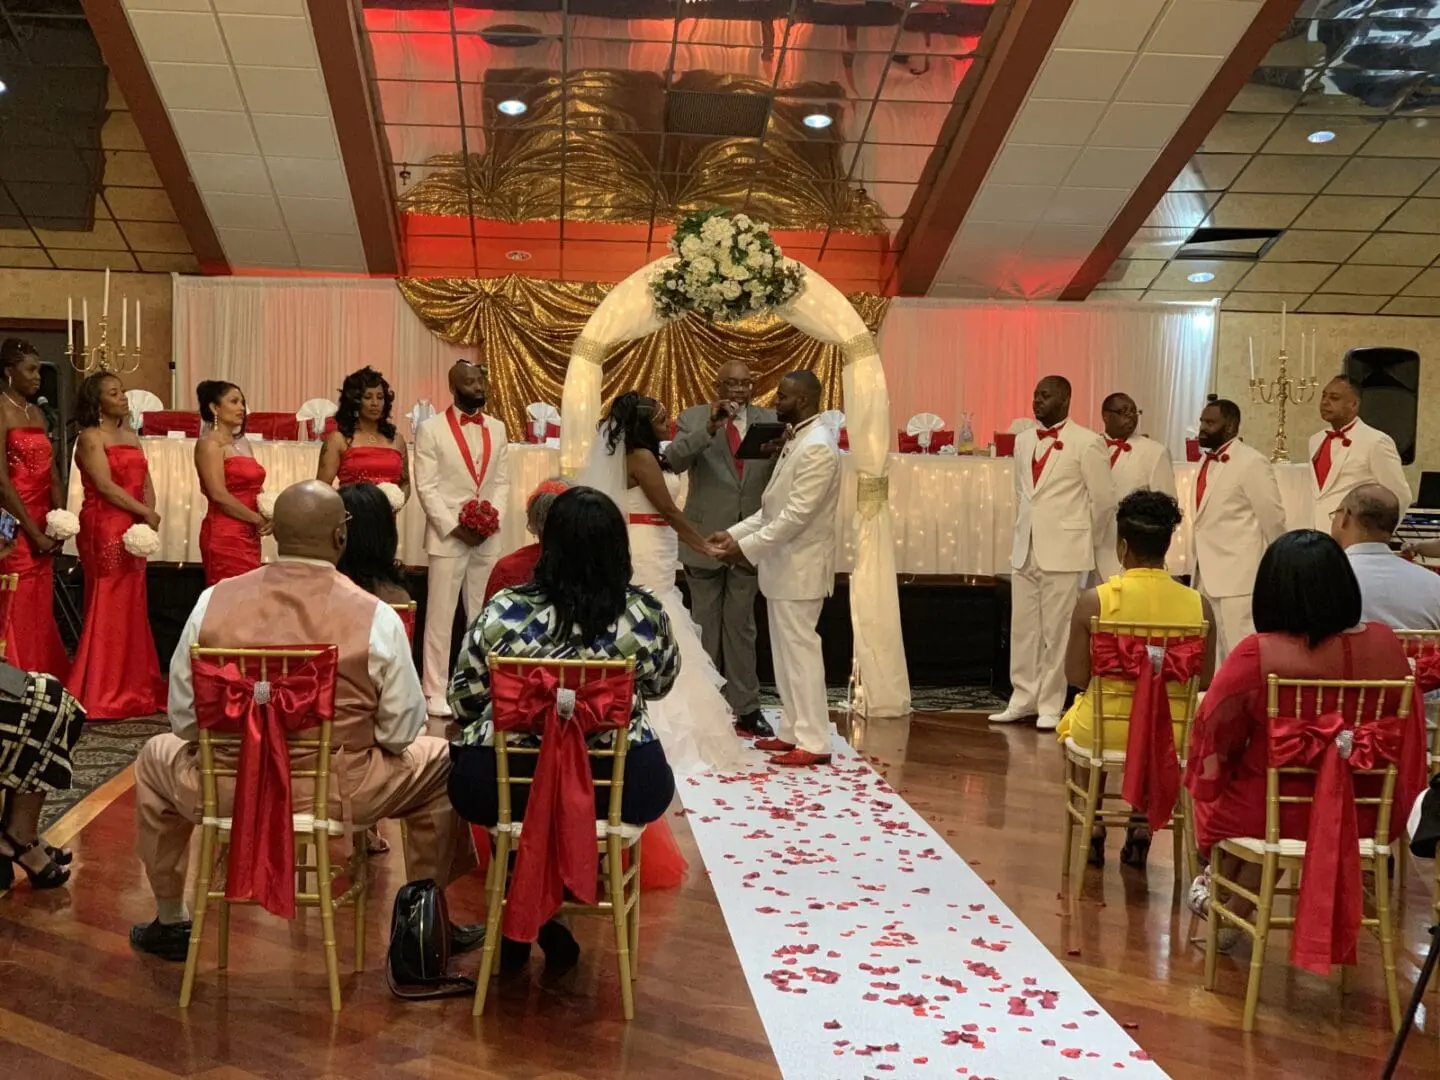 A wedding ceremony with many people in white and red.